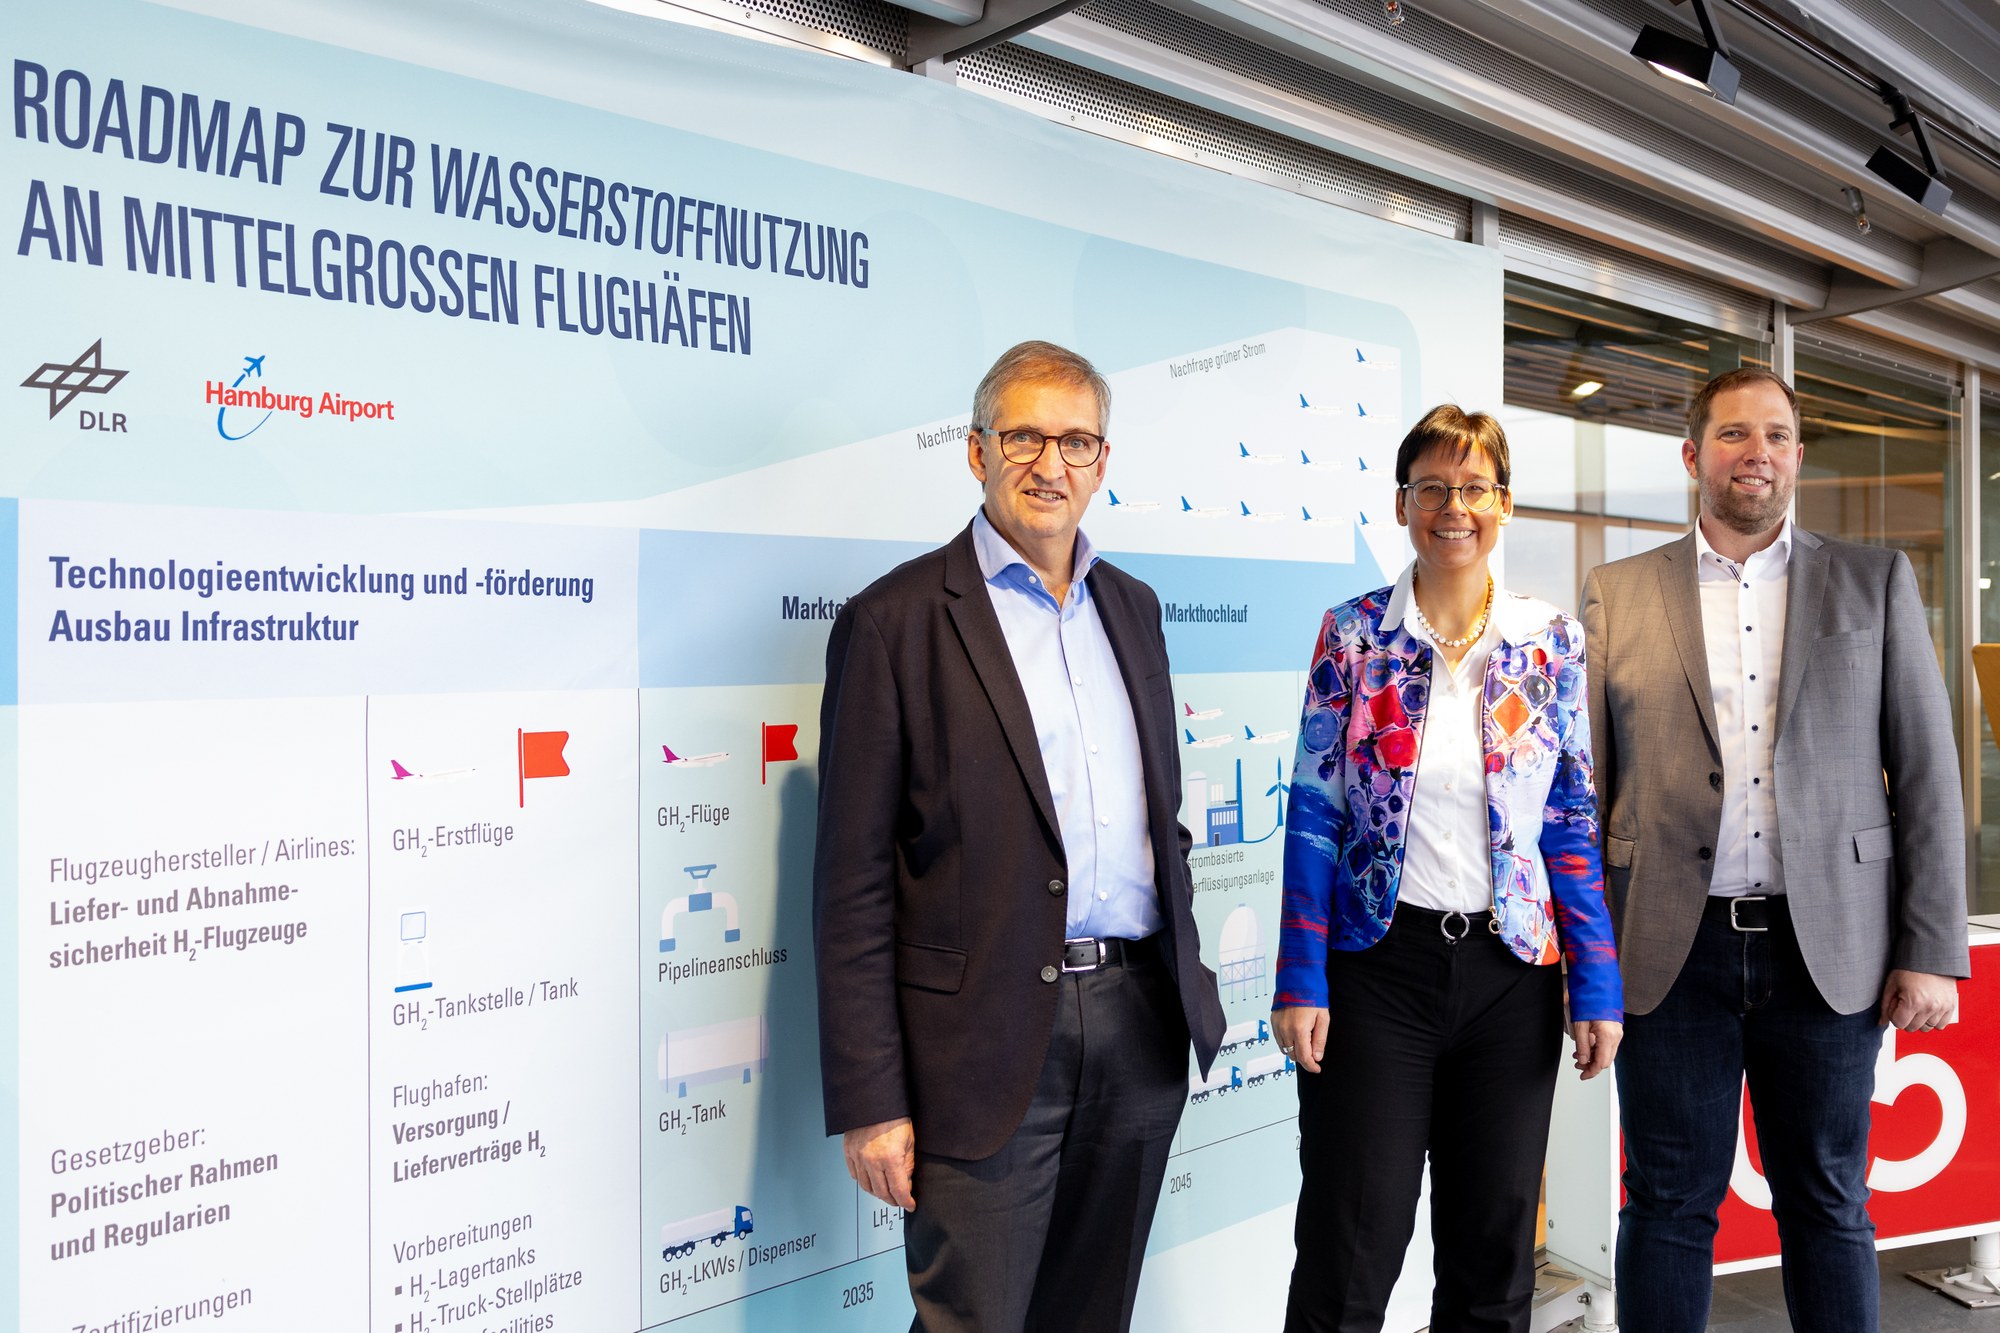 DLR and Hamburg Airport jointly present a roadmap for hydrogen